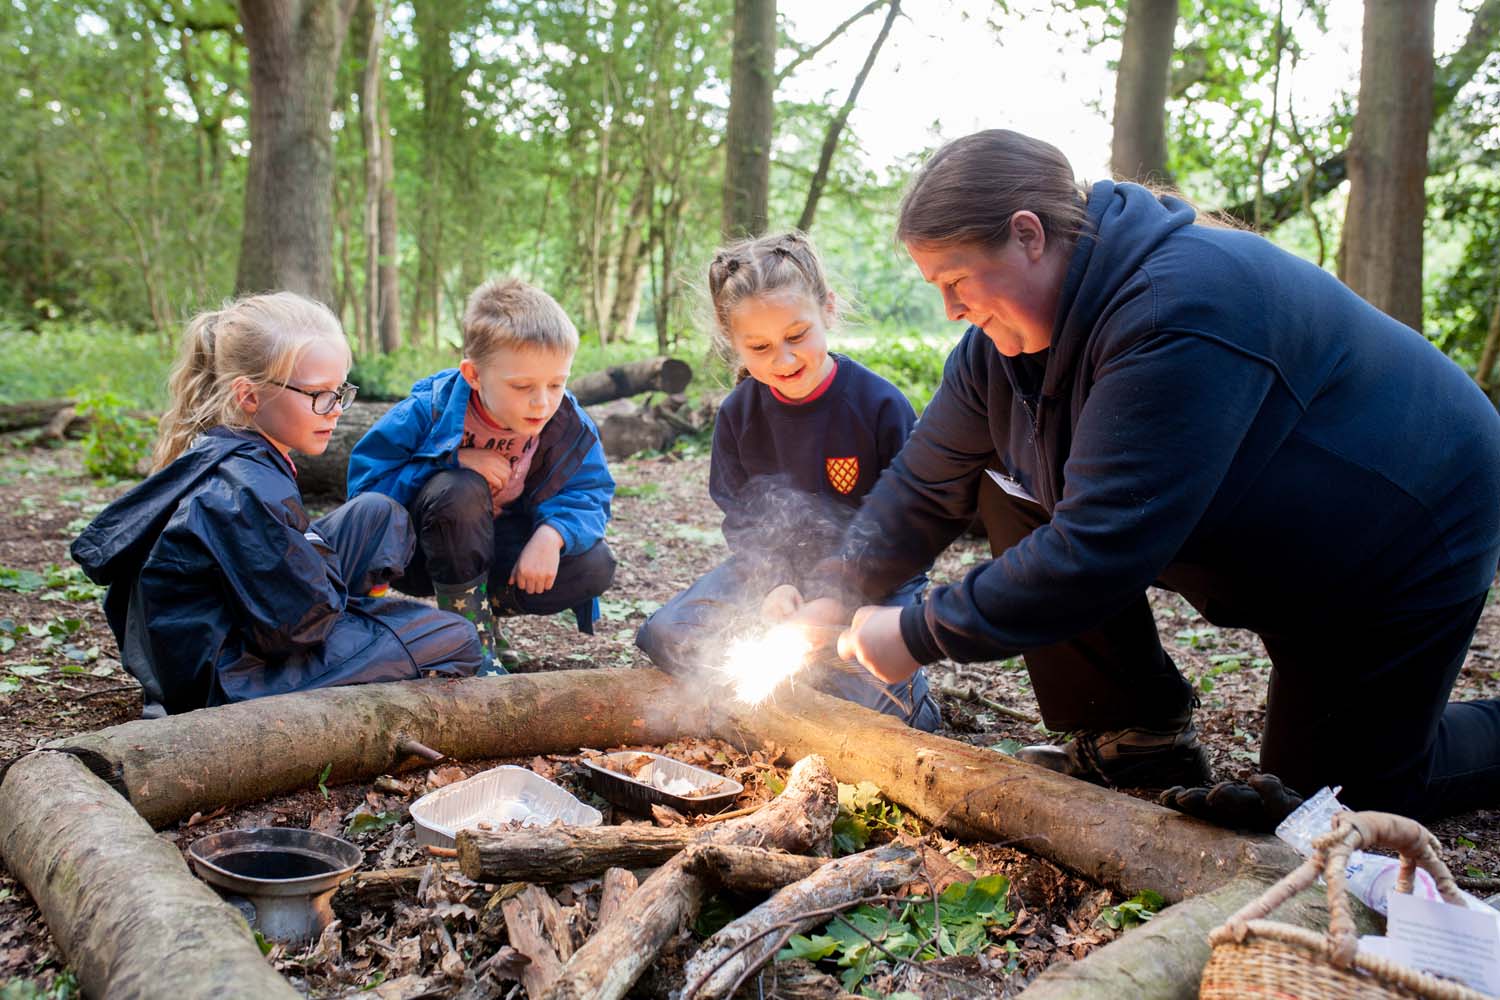 An instructor demonstrates to three children how to start a fire using a fire stick, as part of a Forest School